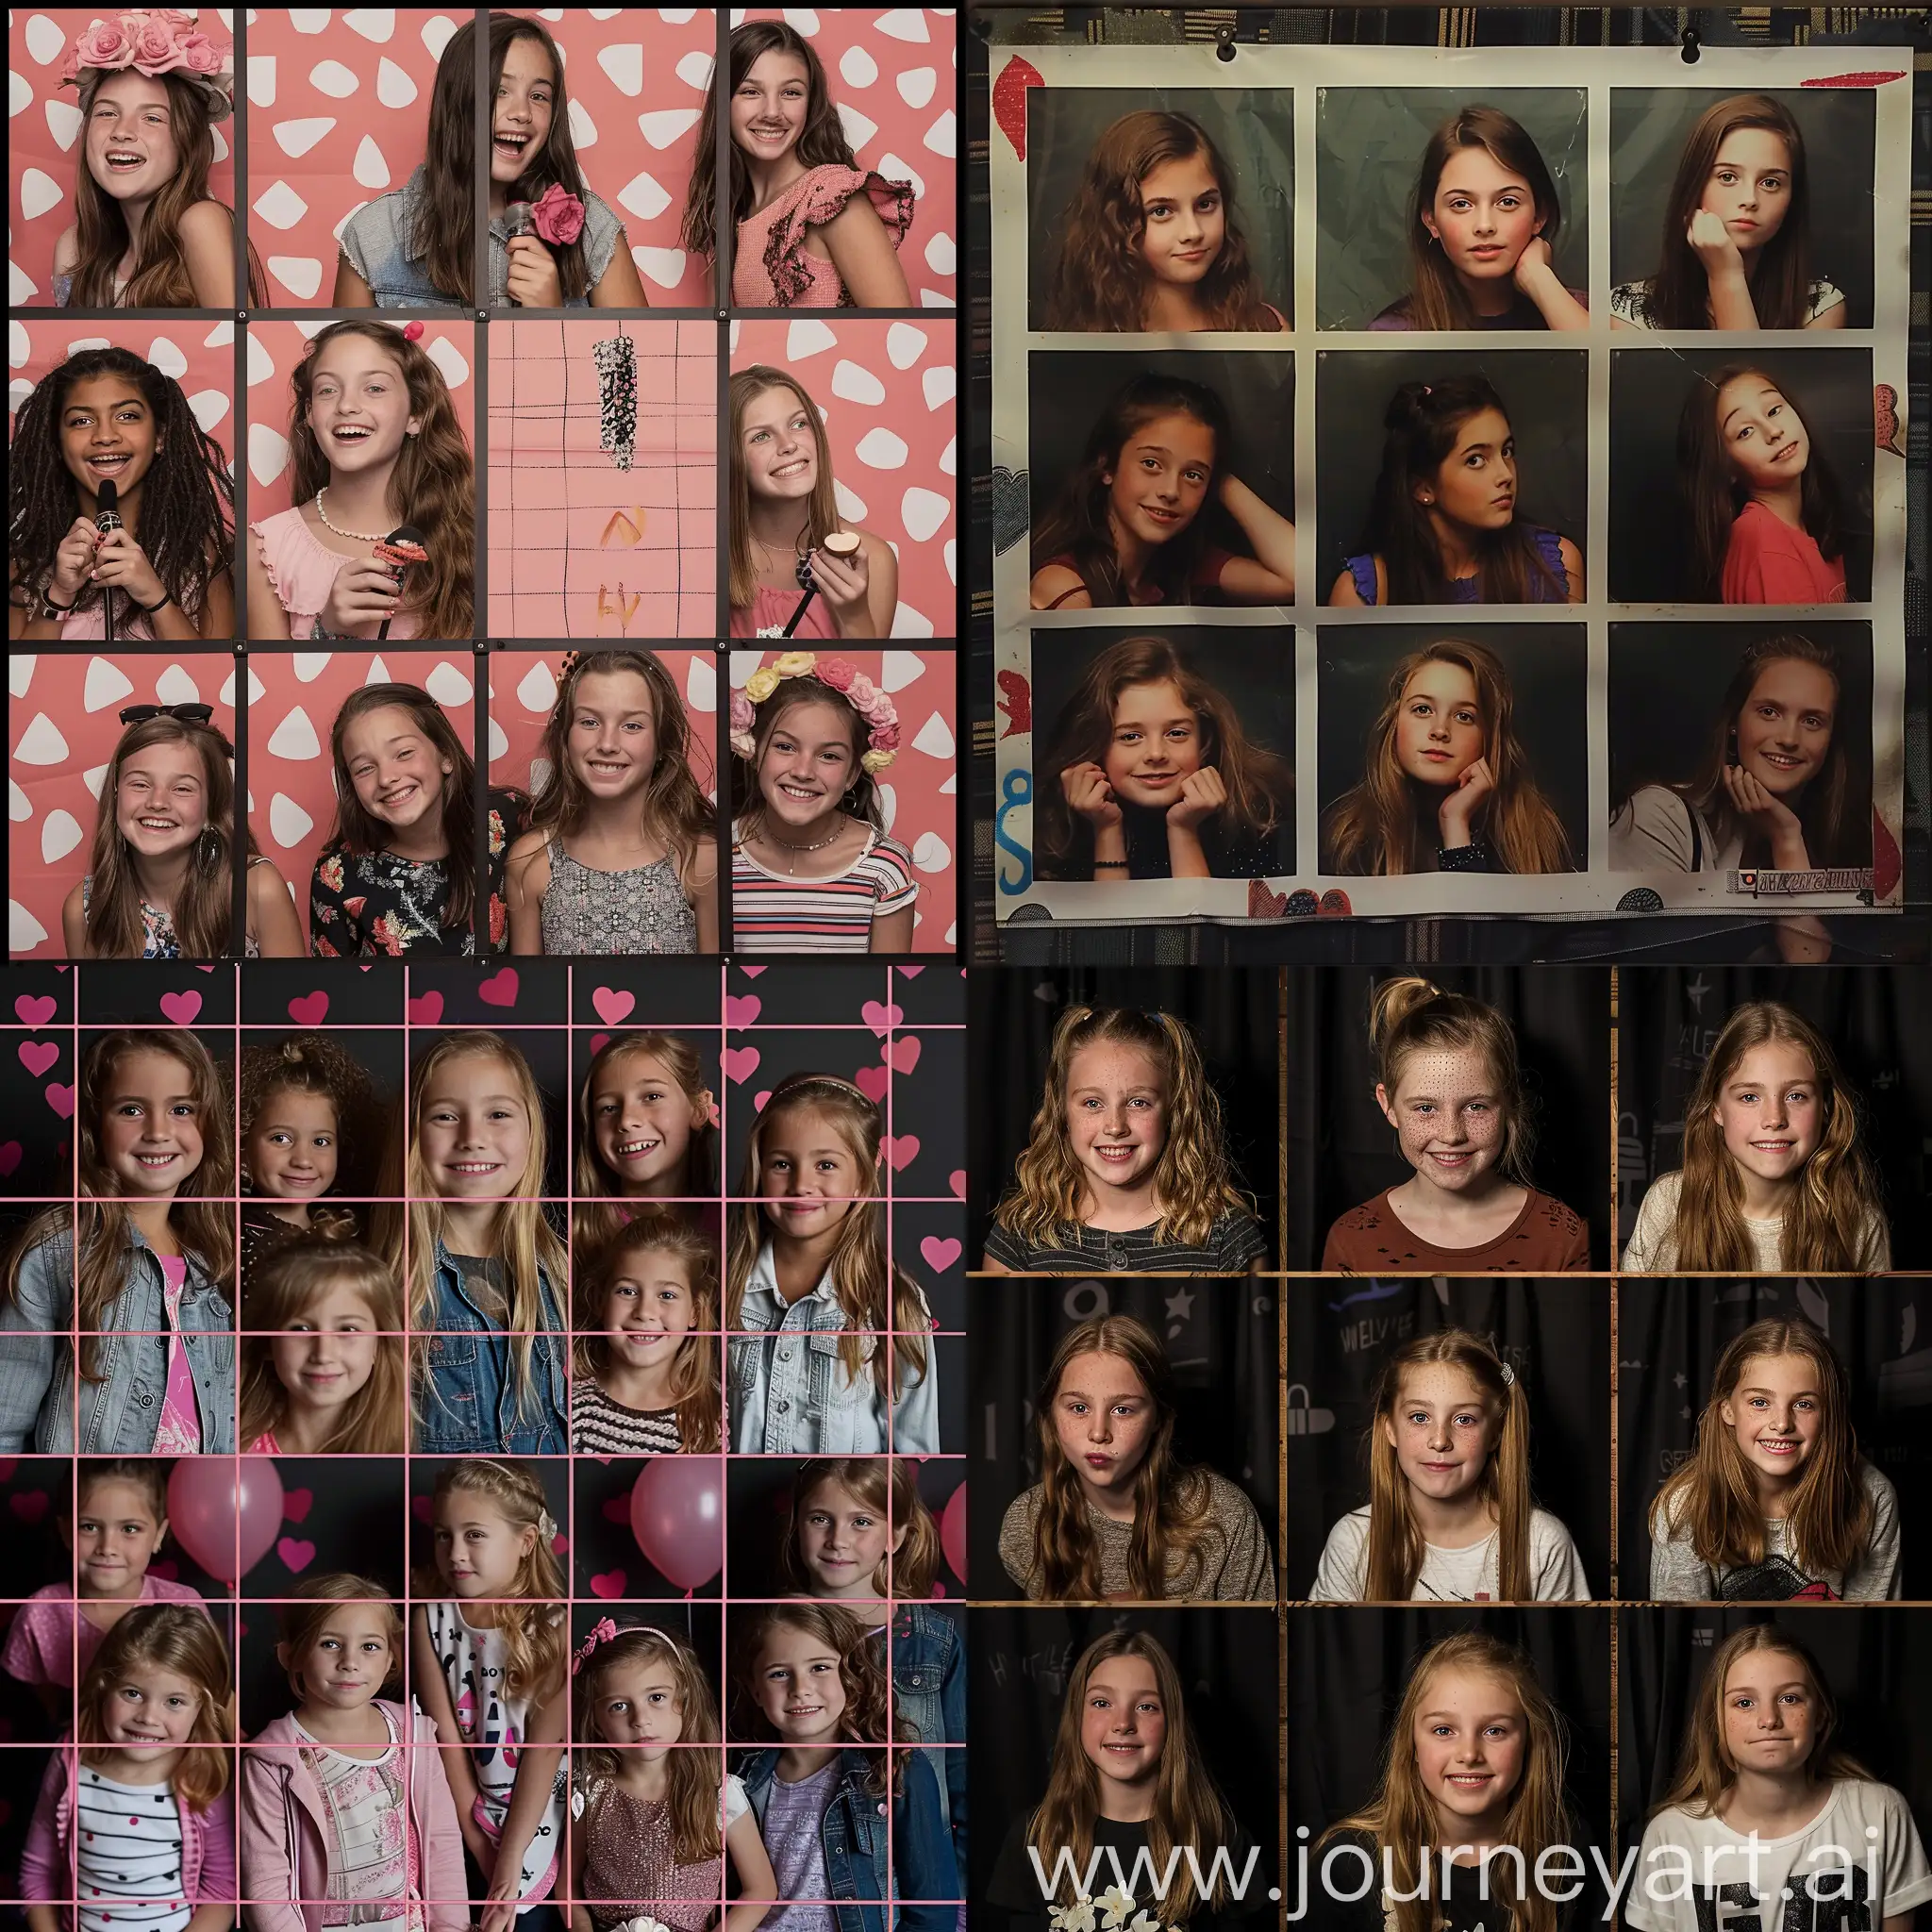 Girls-NineGrid-Photo-Booth-Funfilled-Captures-of-Friendship-and-Joy